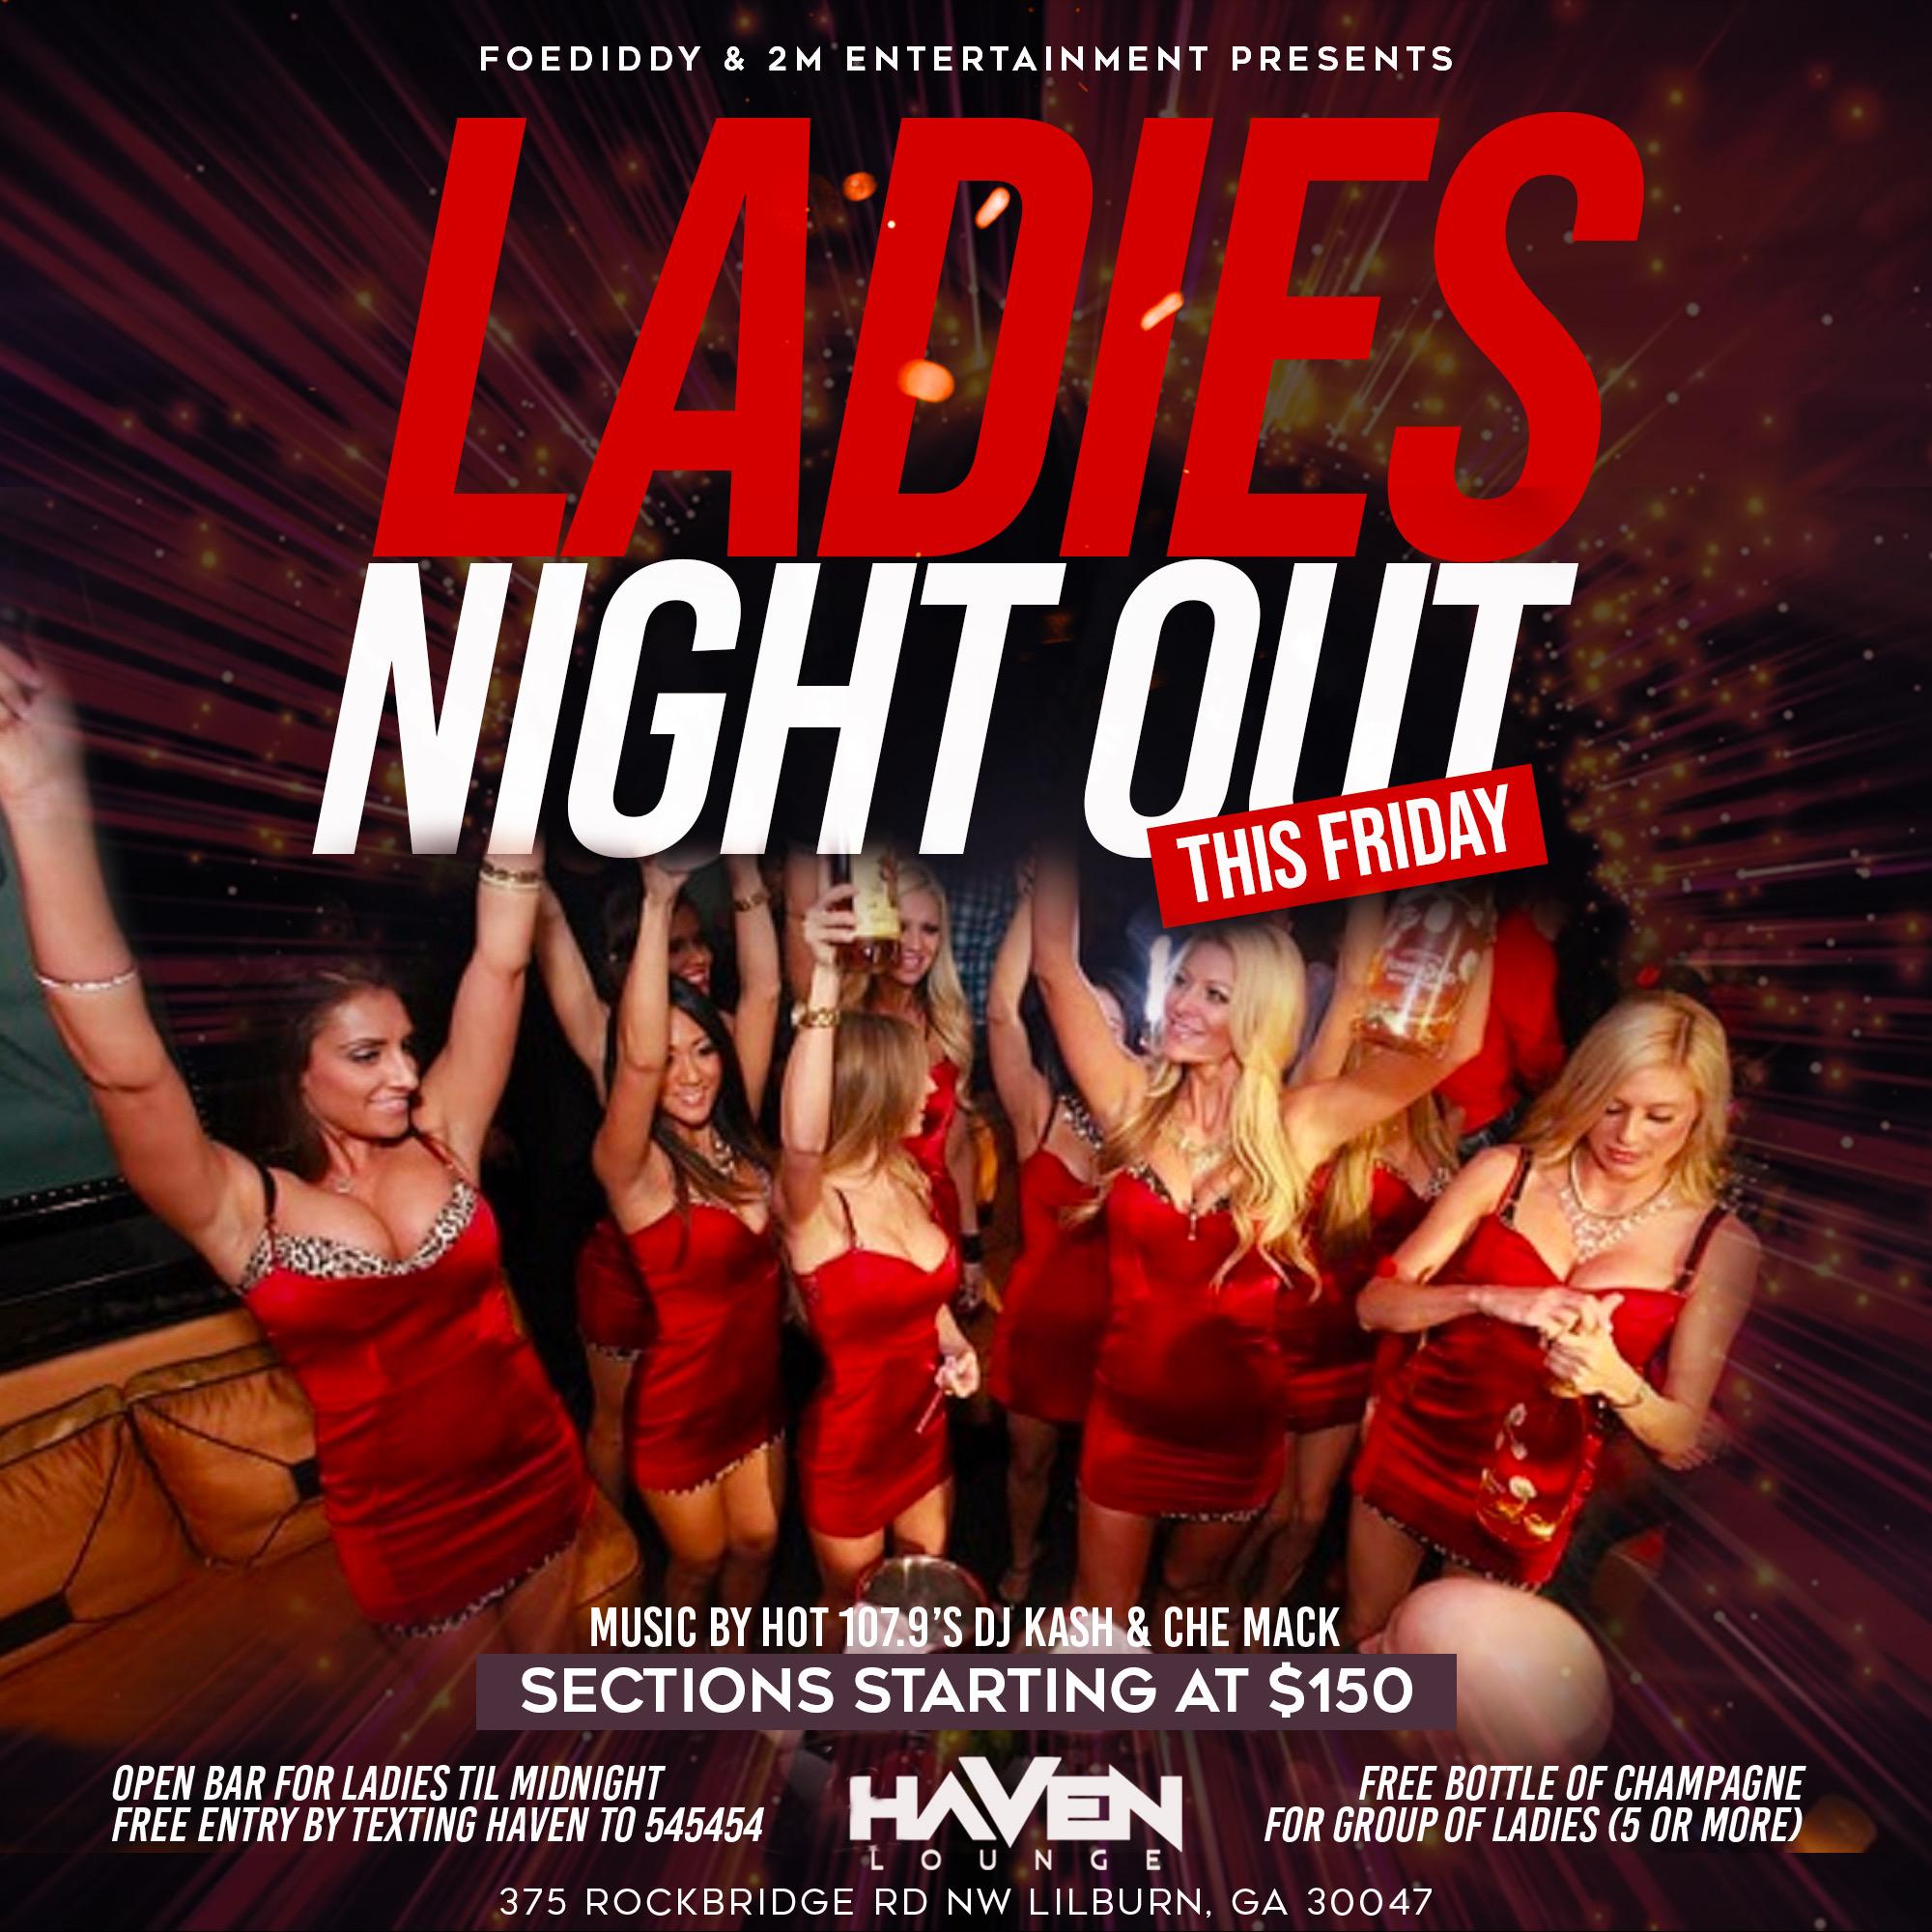 Ladies & Pisces Night Out Friday at Haven Lounge :: OPEN BAR TIL MIDNITE